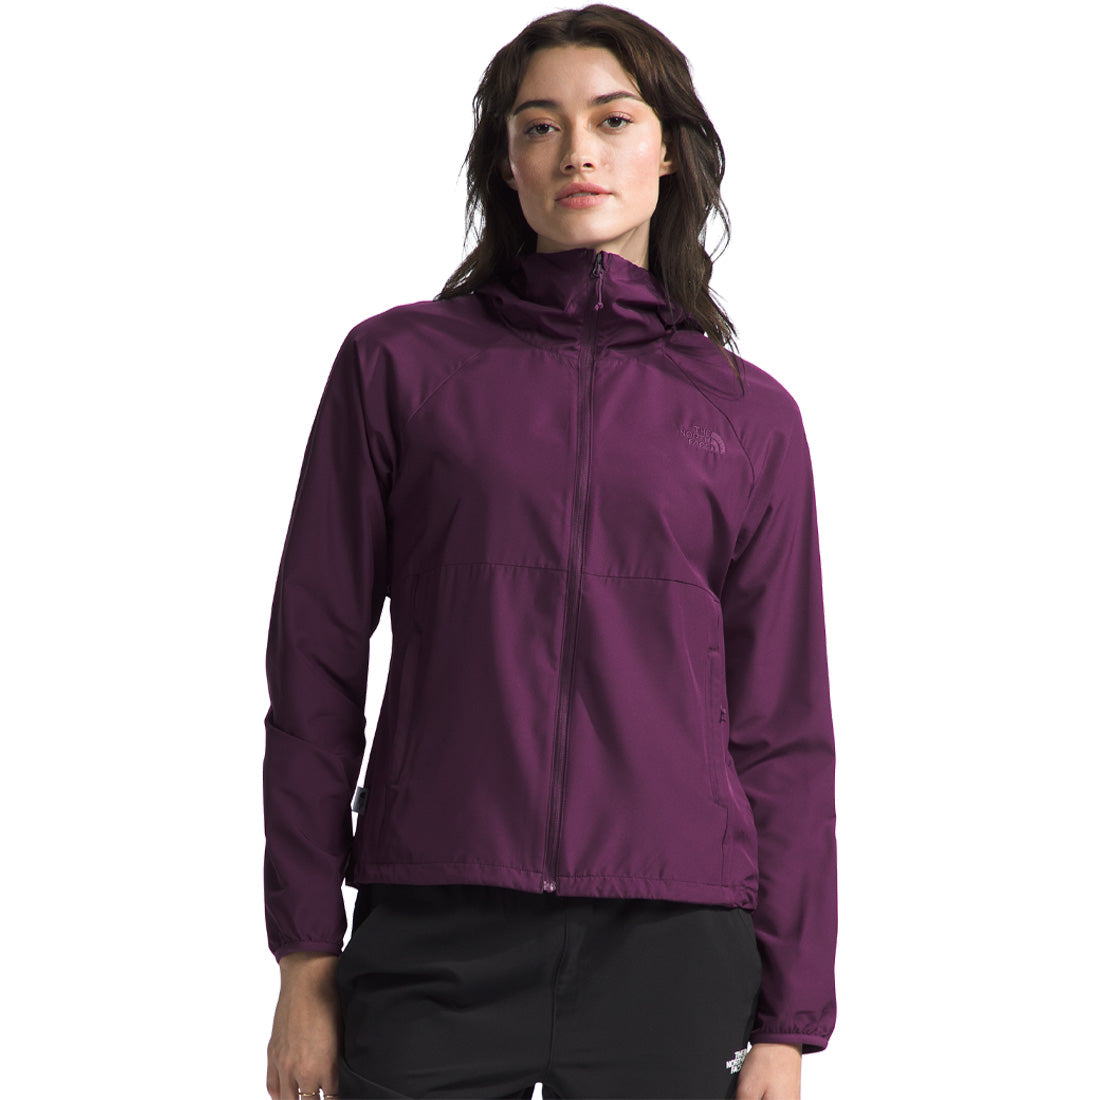 The North Face Flyweight Hoodie 2.0 - Women's